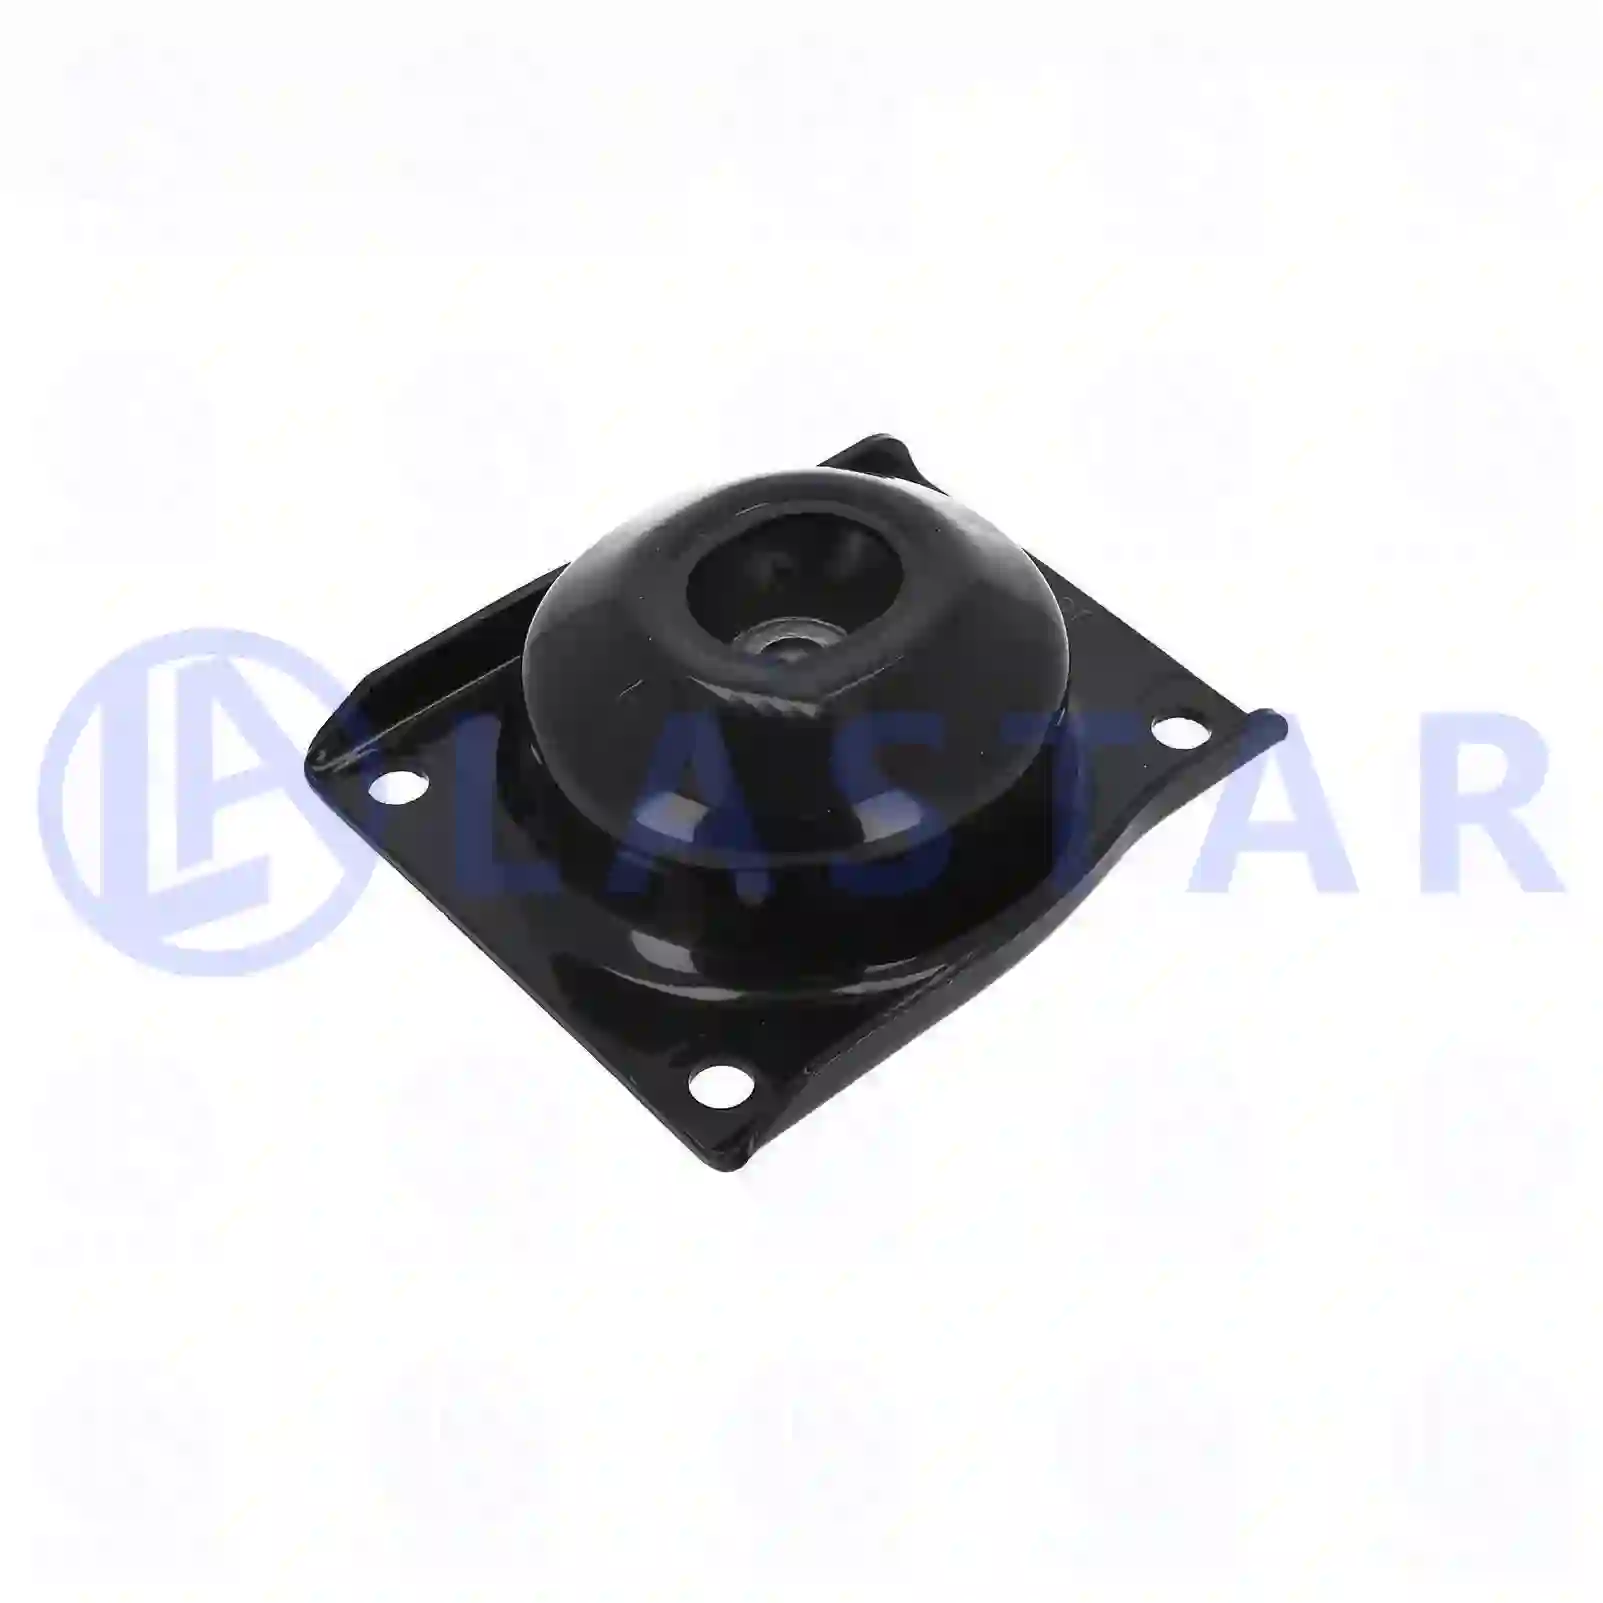 Engine mounting, 77700242, 21810944, 2199737 ||  77700242 Lastar Spare Part | Truck Spare Parts, Auotomotive Spare Parts Engine mounting, 77700242, 21810944, 2199737 ||  77700242 Lastar Spare Part | Truck Spare Parts, Auotomotive Spare Parts